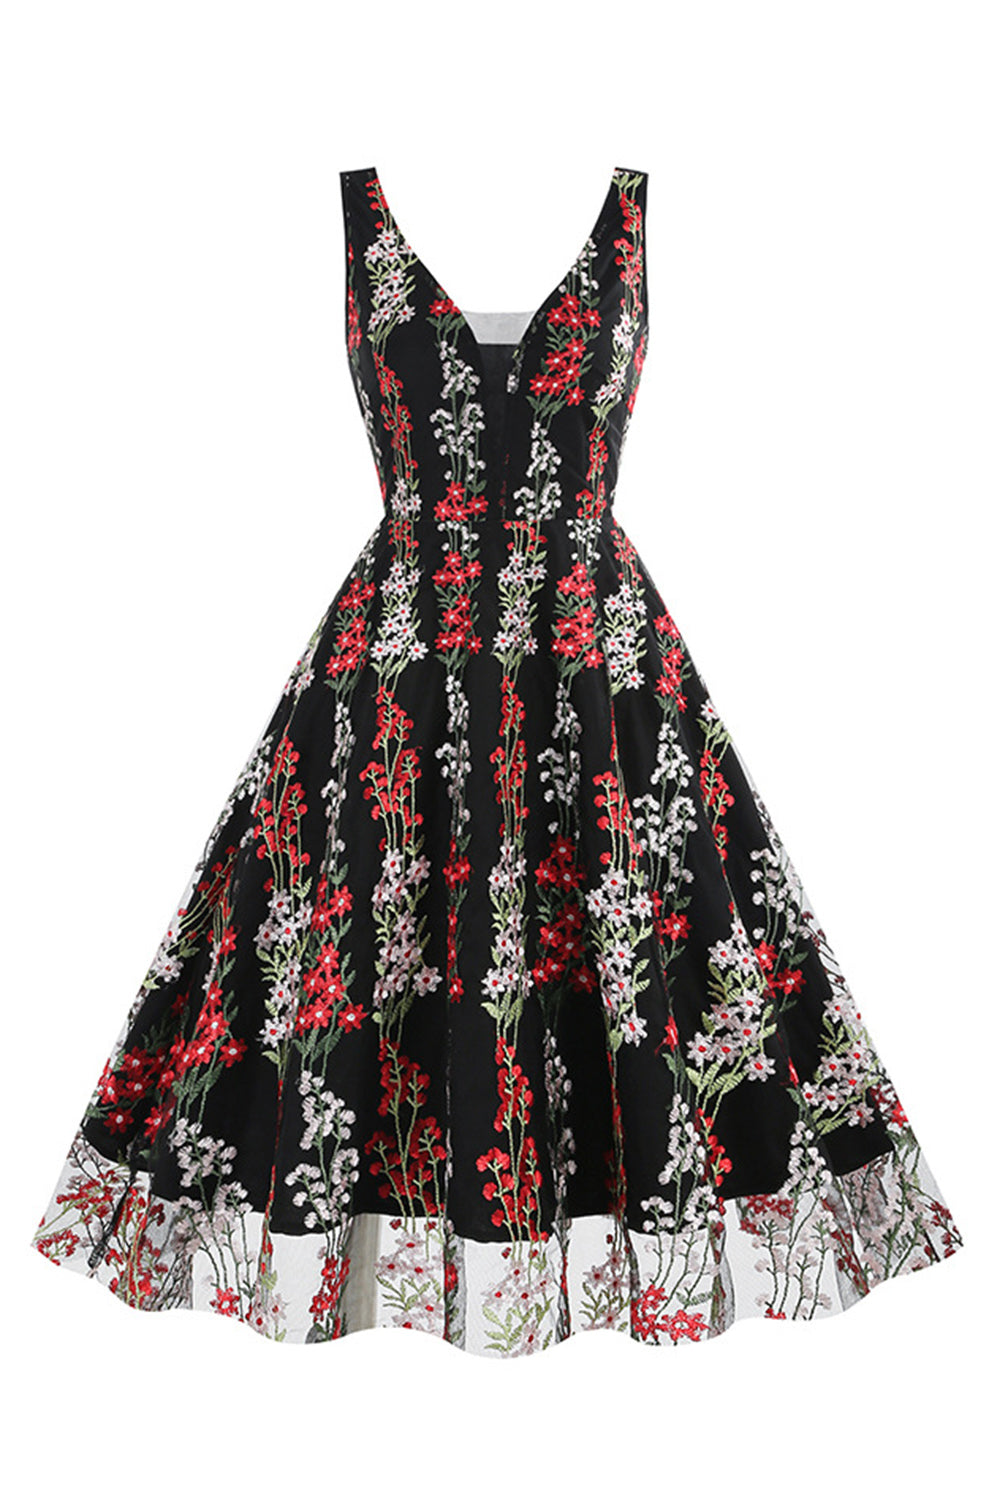 Black Swing 1950s Dress with Embroidery